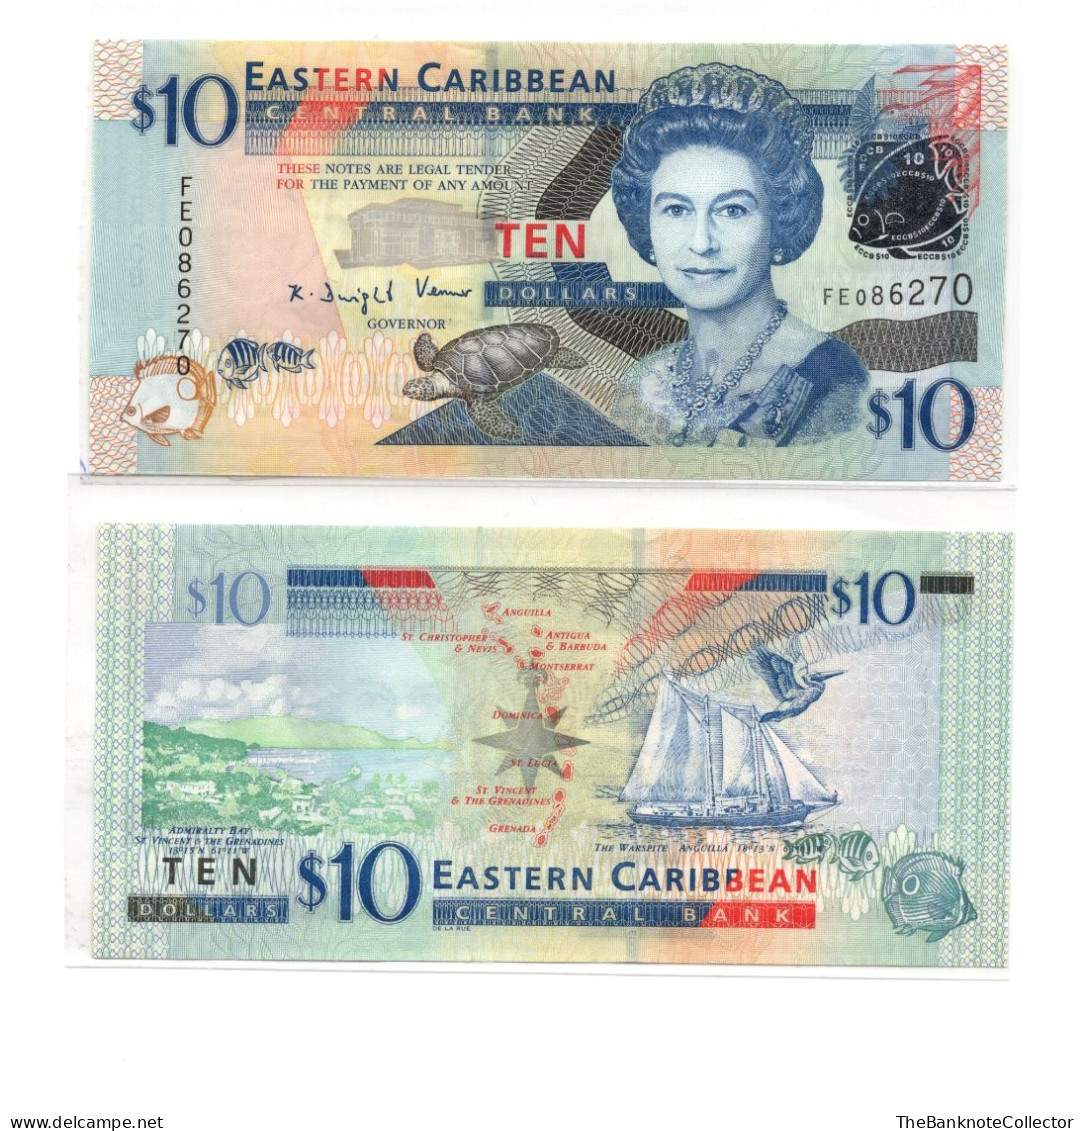 Eastern Caribbean Central Bank 10 Dollars ND 2008 QEII P-48 UNC - Caraïbes Orientales